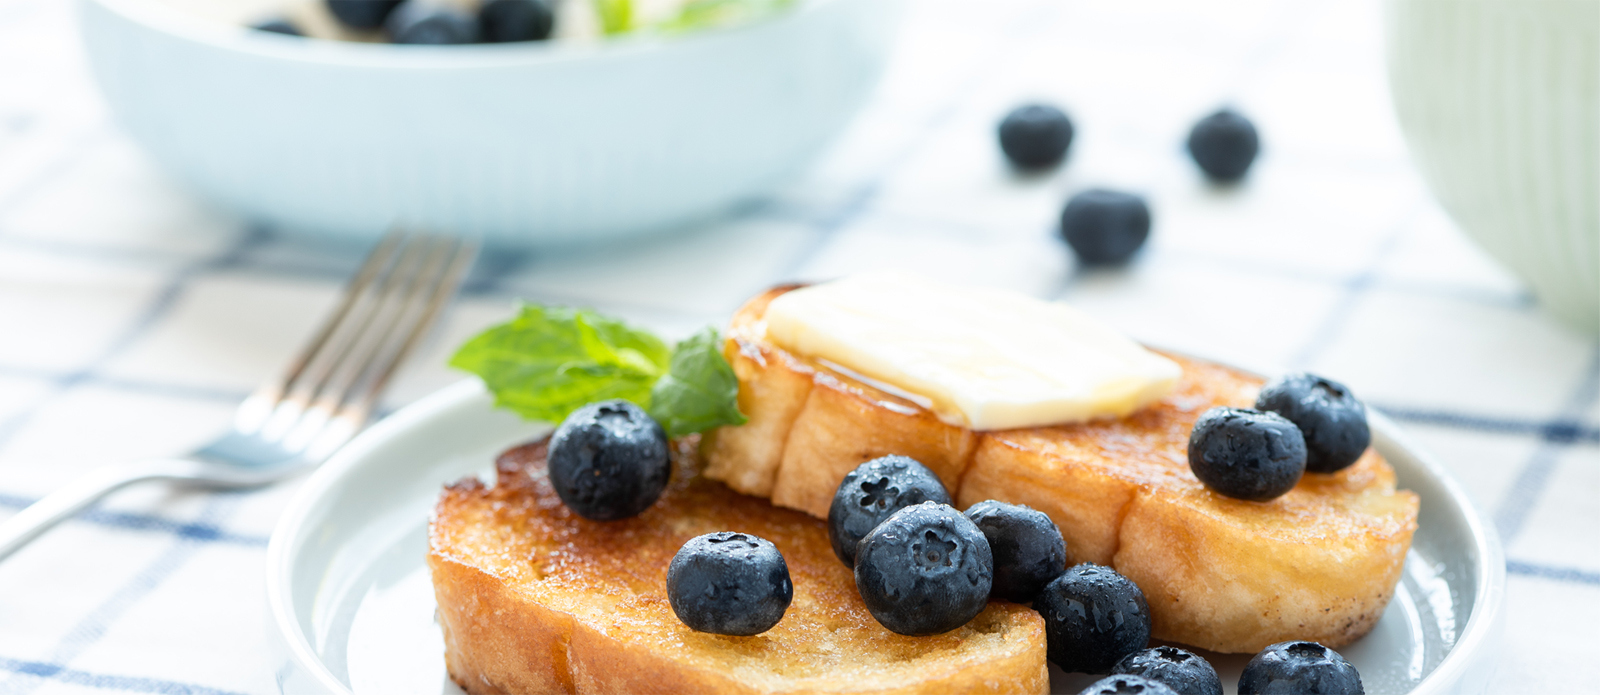 plate of toast with butter and blueberries